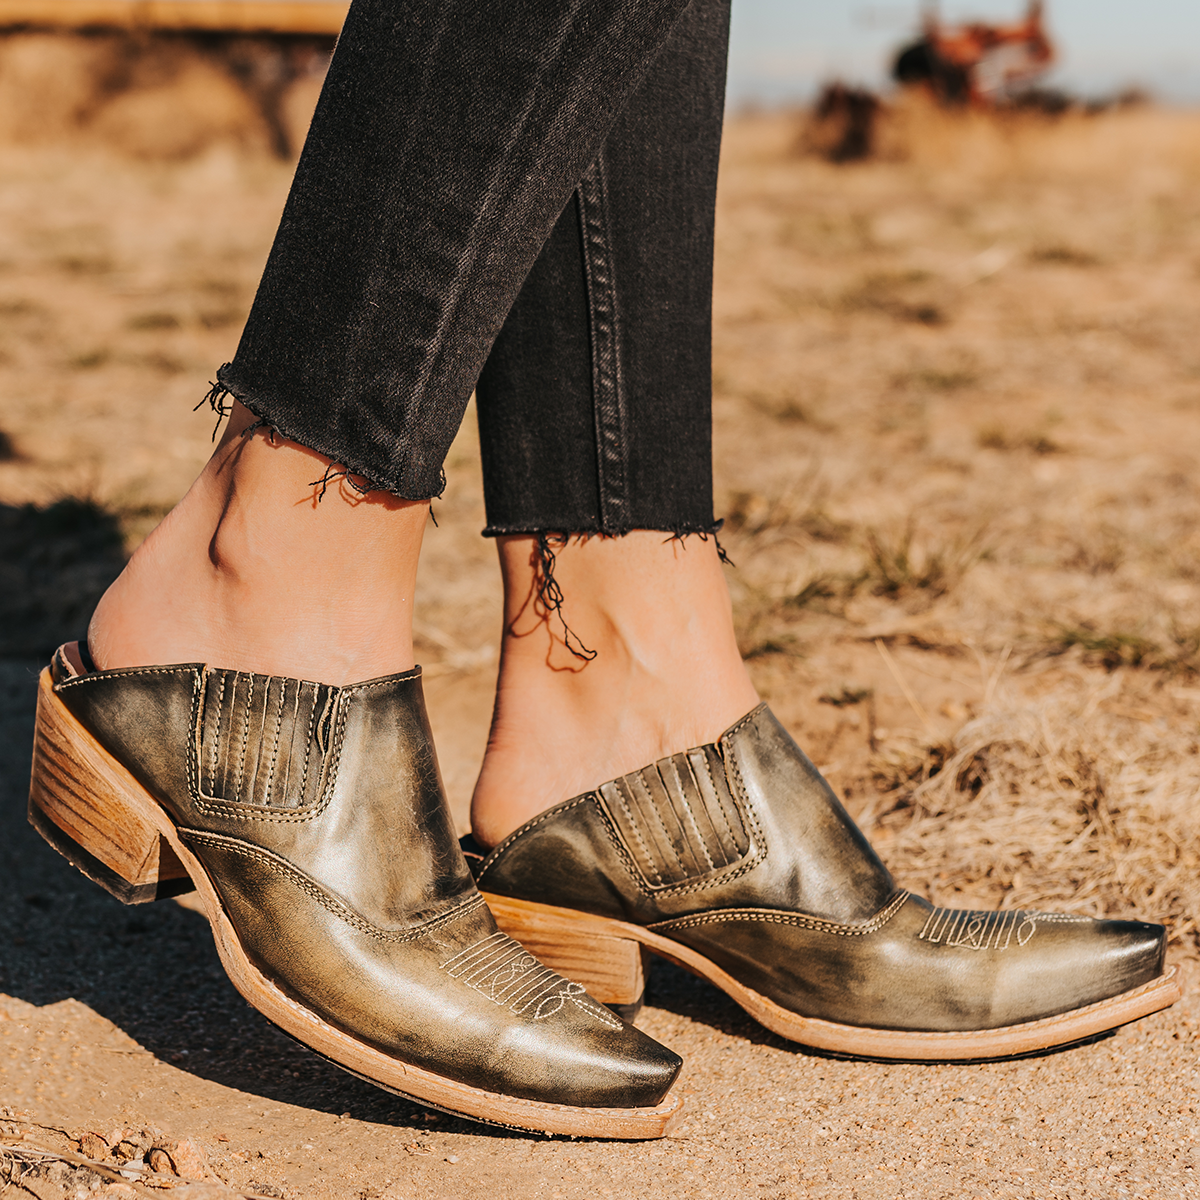 FREEBIRD women's Wentworth olive western mule featuring elastic gore, stitch detailing, open back, and snip toe